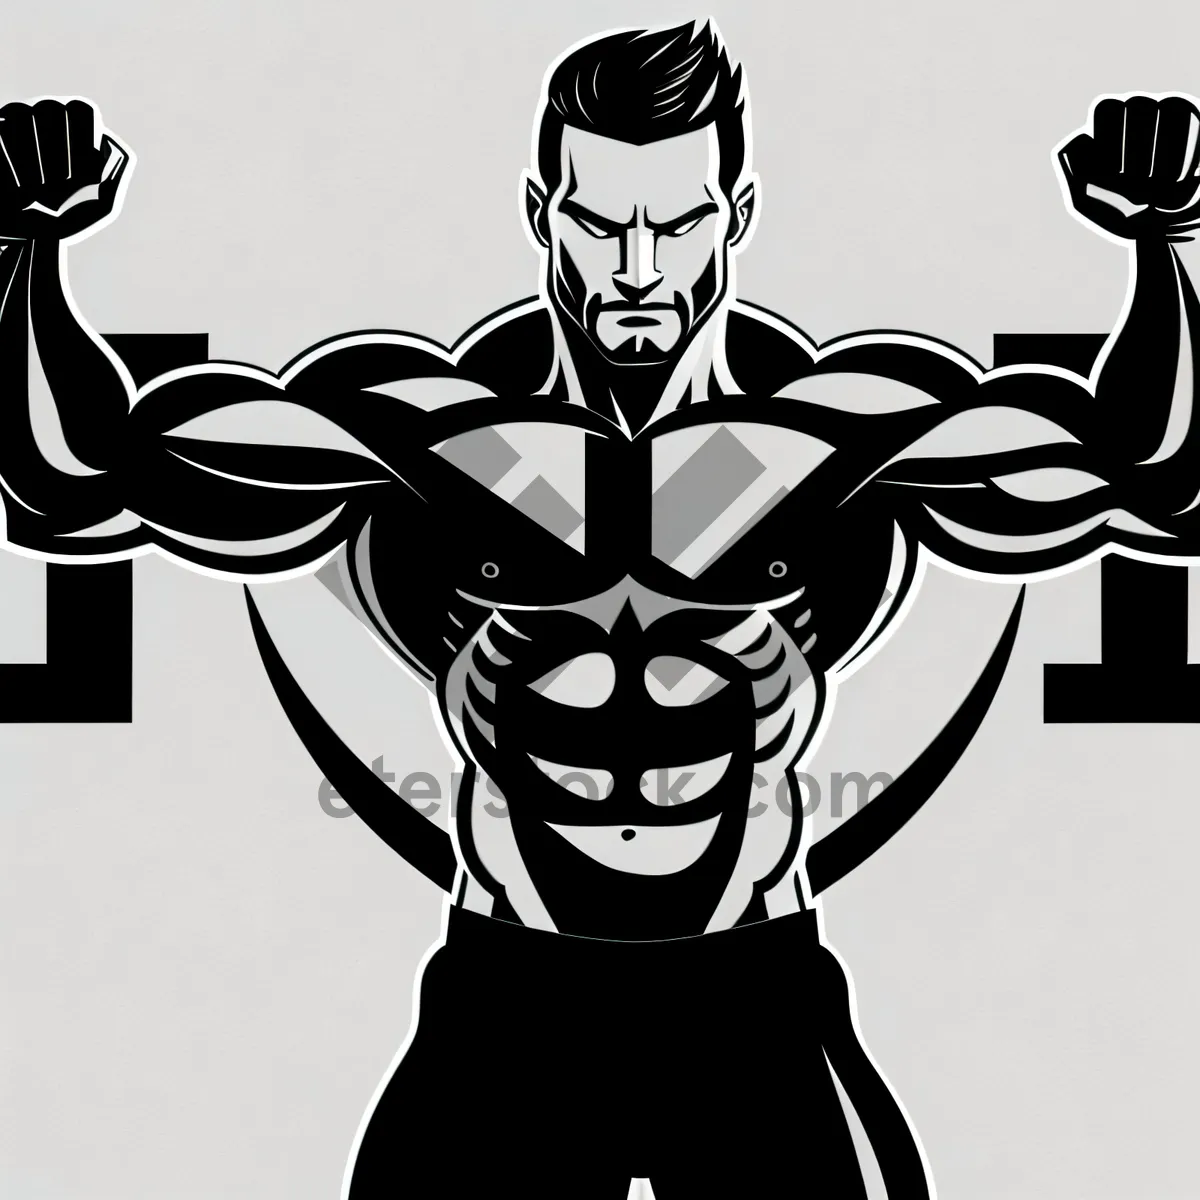 Picture of Muscular Black Man in Dynamic Silhouette - Artistic Cartoon Sketch